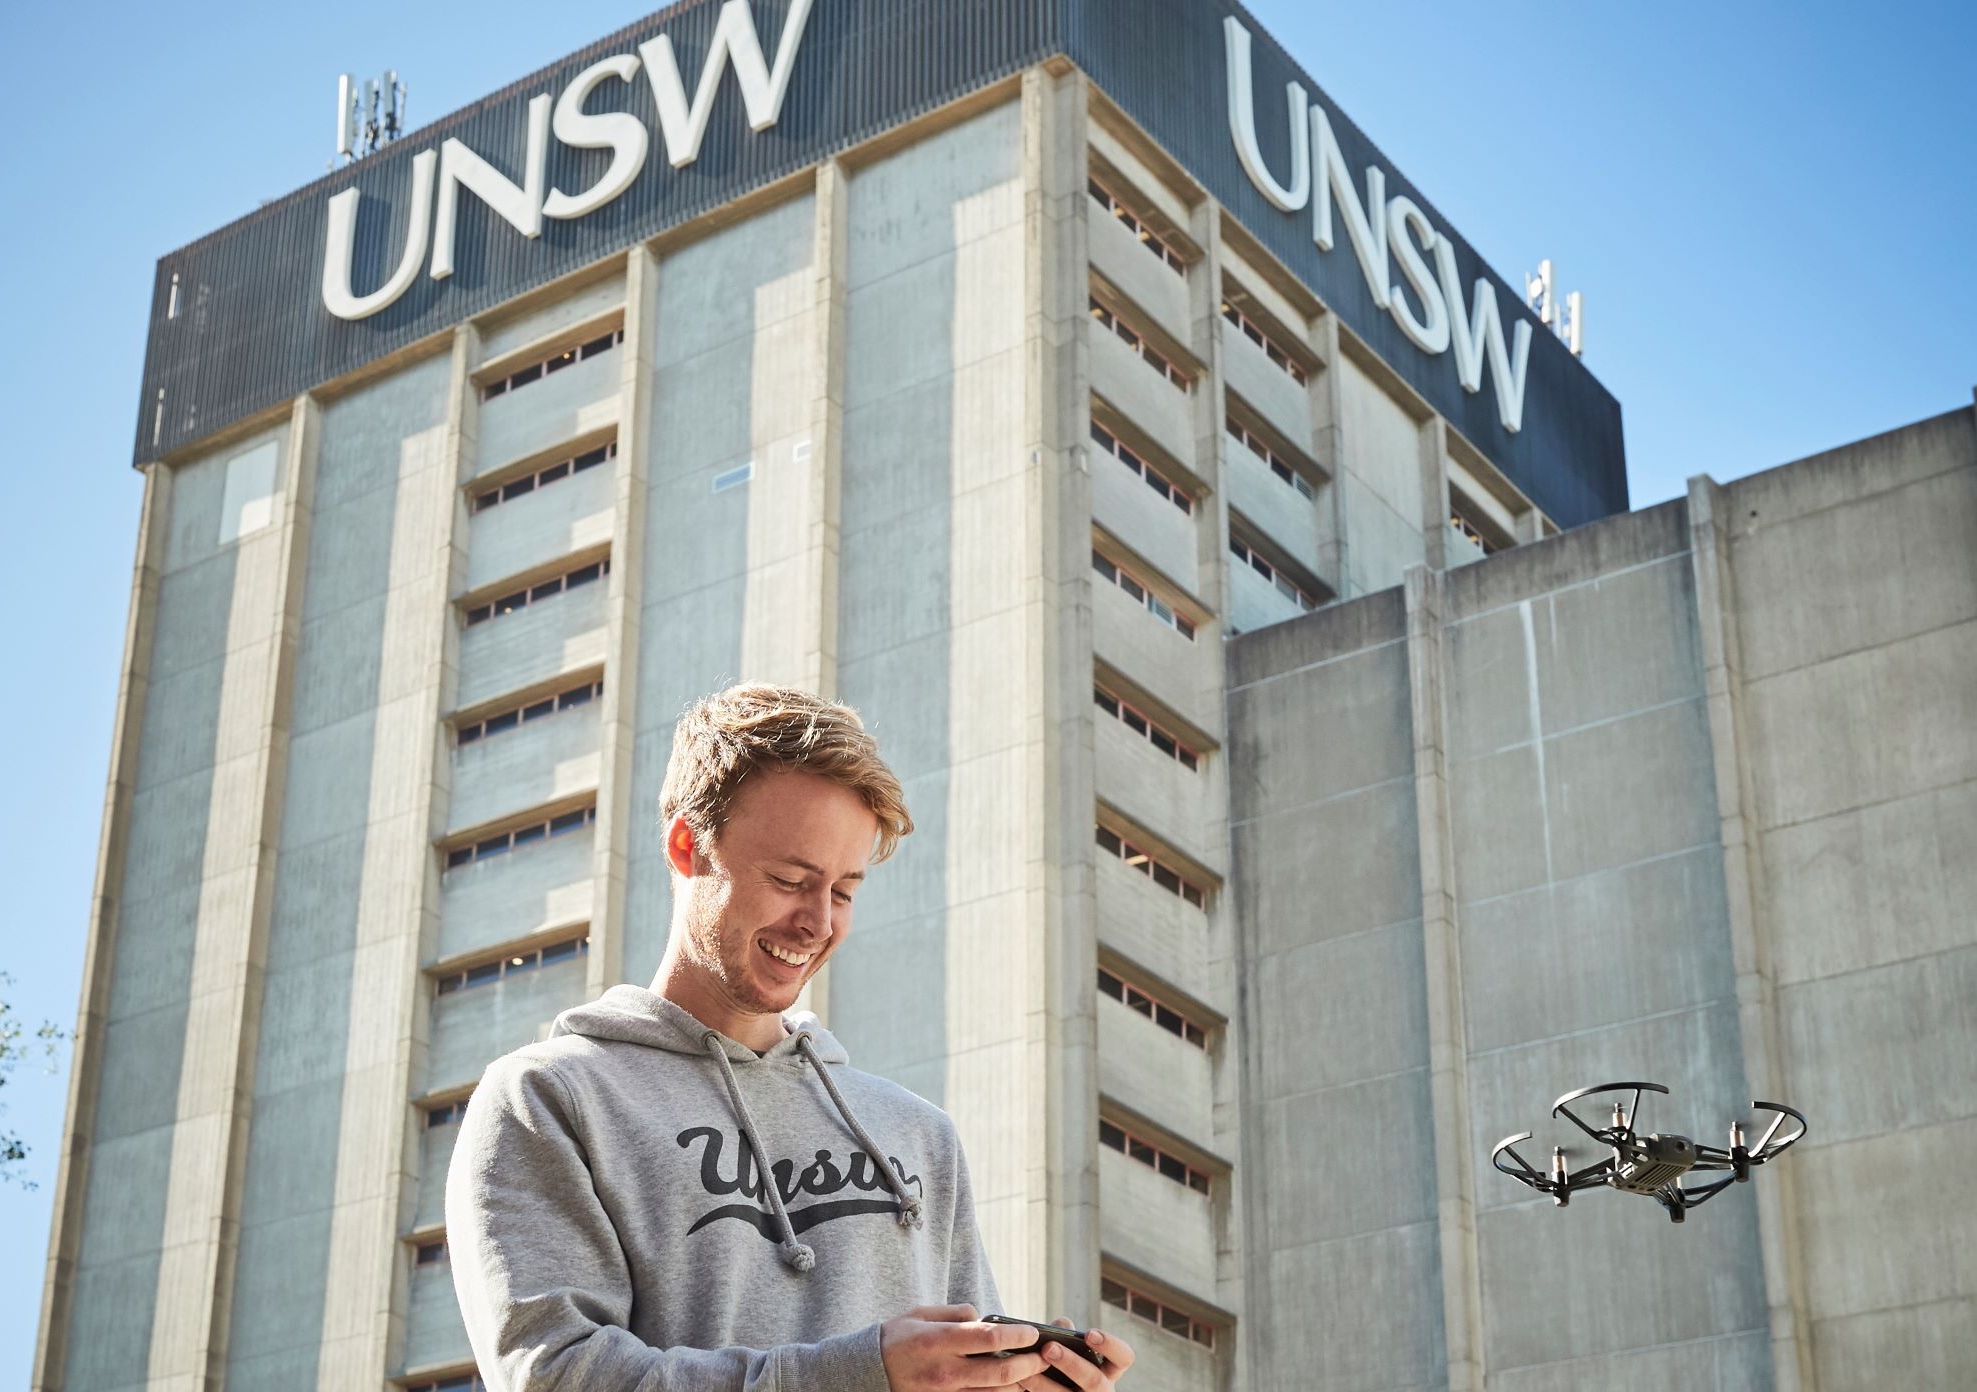 UNSW students will benefit from access to DJI&#039;s robotics expertise.